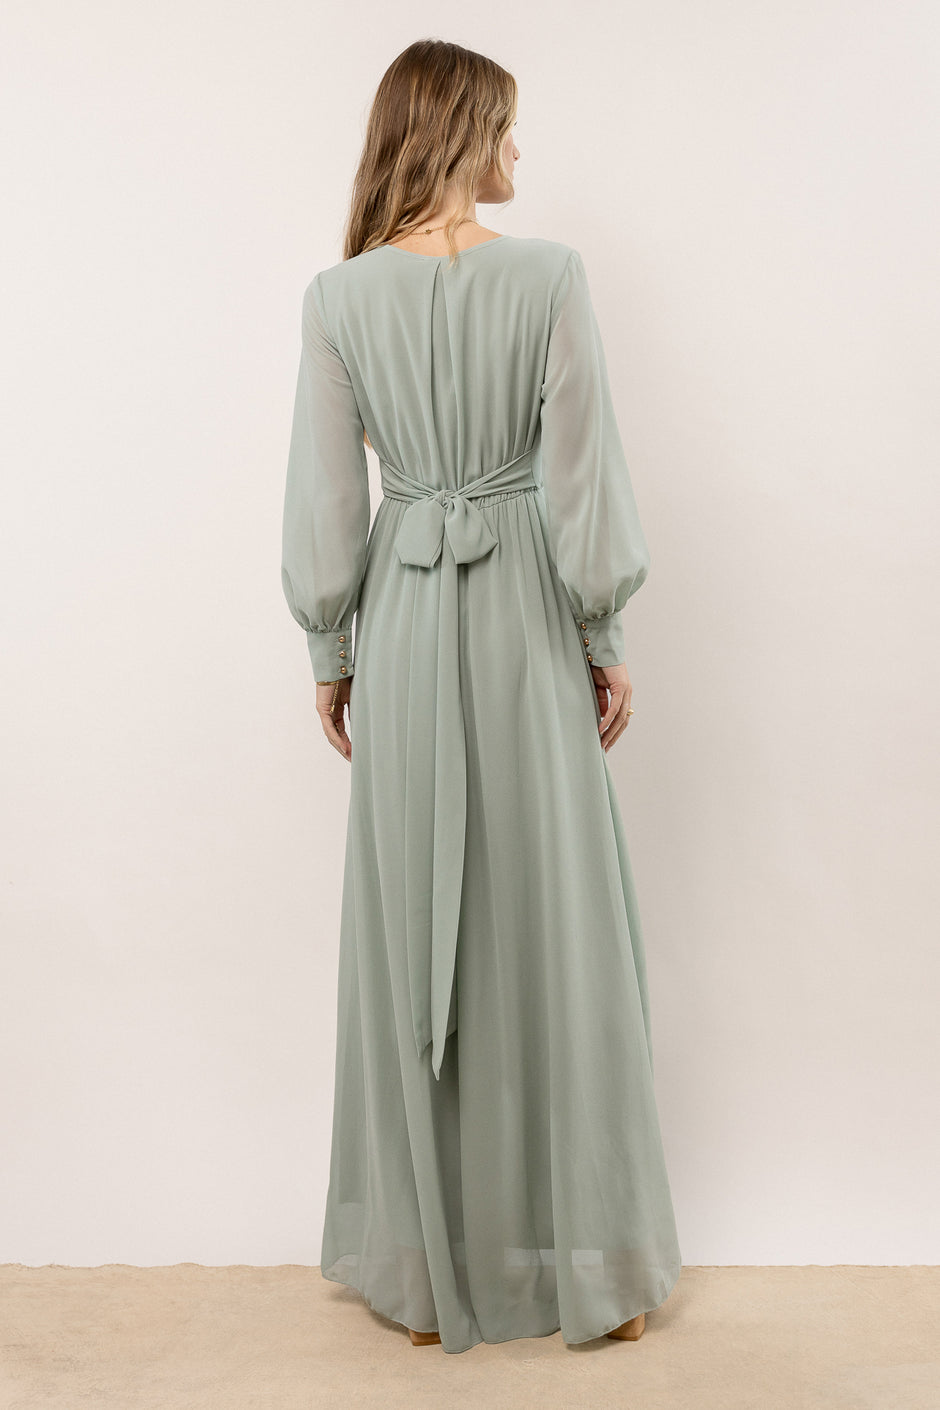 Bridesmaid Dresses: Shop Aesthetic Dresses for Every Wedding Party | böhme